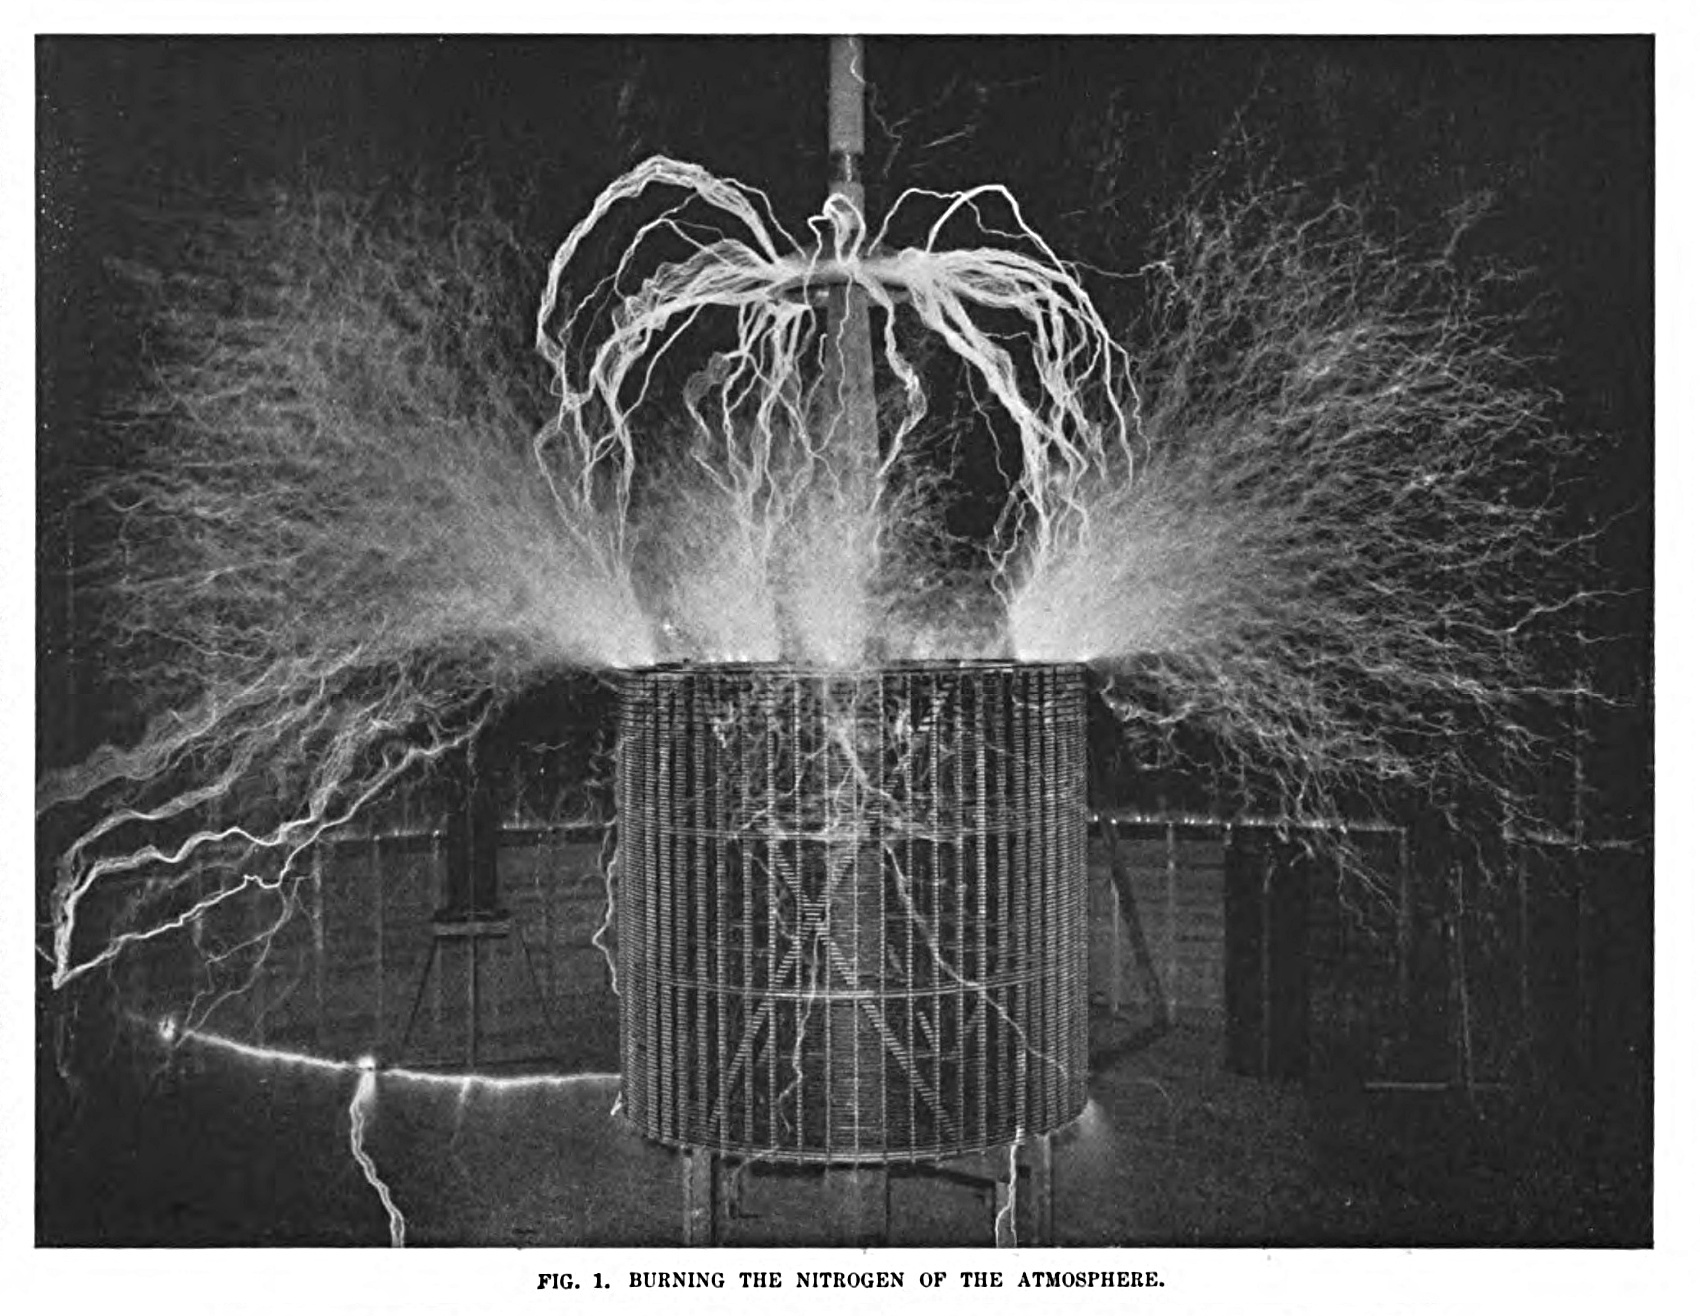 FIG. 1. Burning the Nitrogen of the Atmosphere. Note to Fig. 1. - This result is produced by the discharge of an electrical oscillator giving twelve million volts. The electrical pressure, alternating one hundred thousand times per second, excites the normally inert nitrogen, causing it to combine with the oxygen. The flame-like discharge shown in the photograph measures sixty-five feet across.